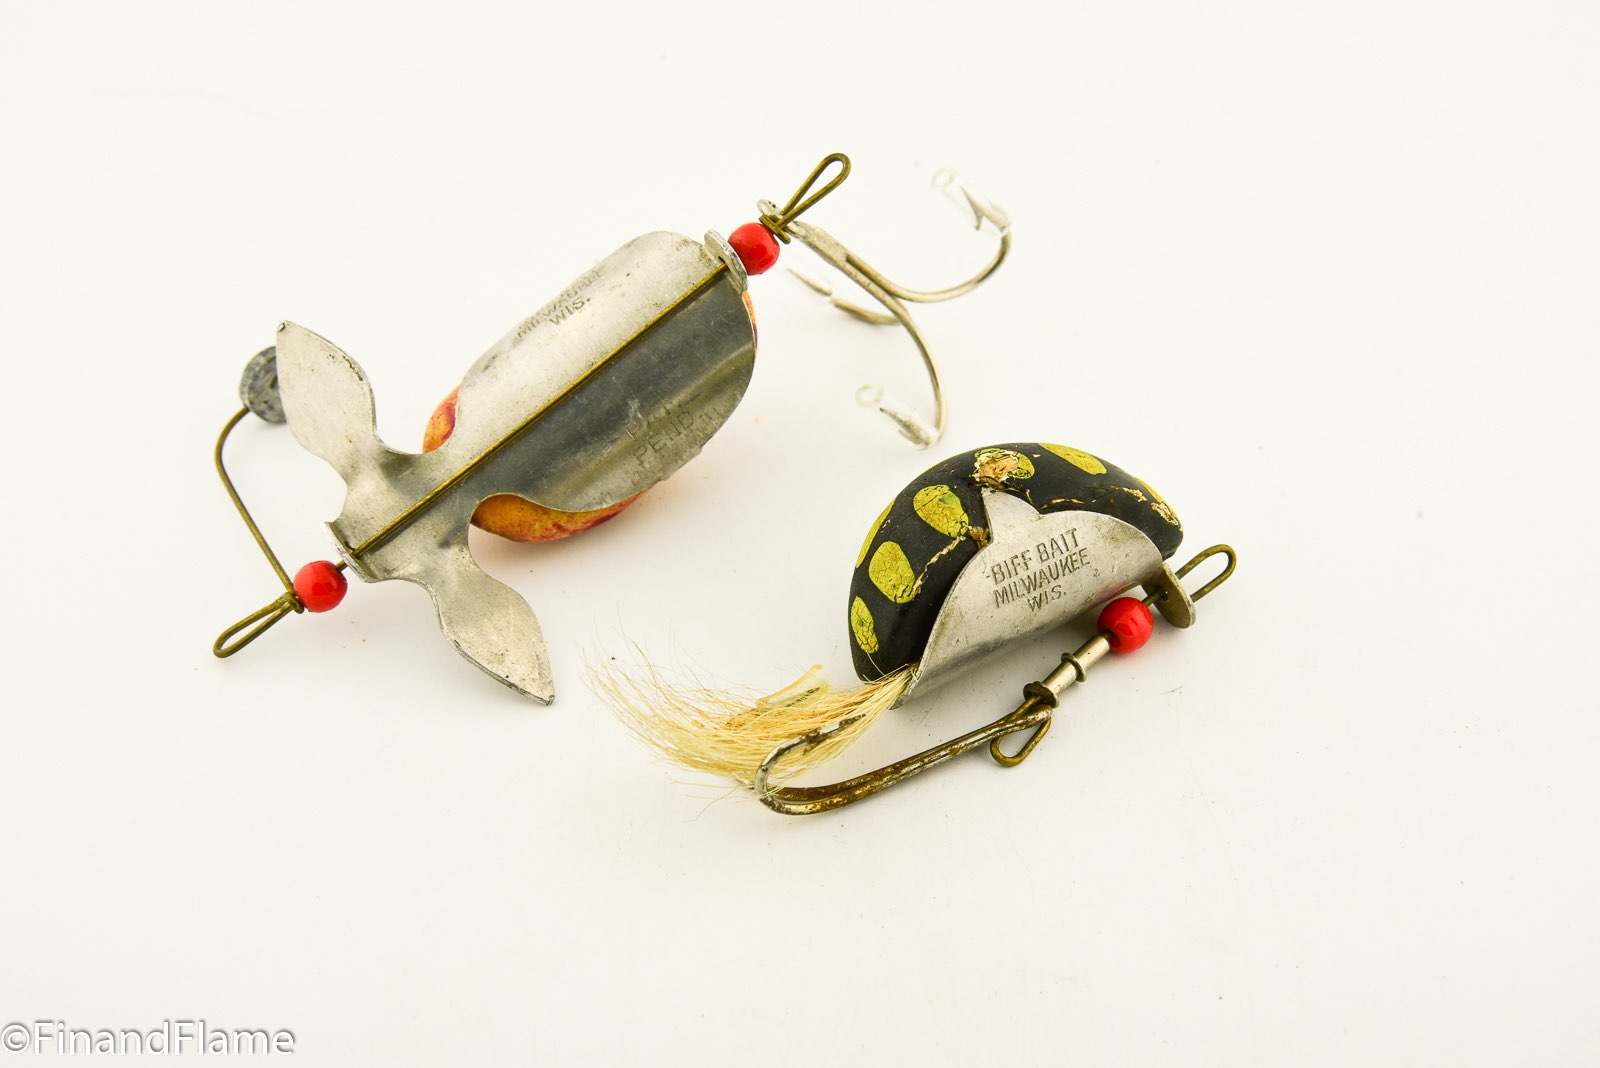 Biff GoDevil Antique Lure - Fin & Flame